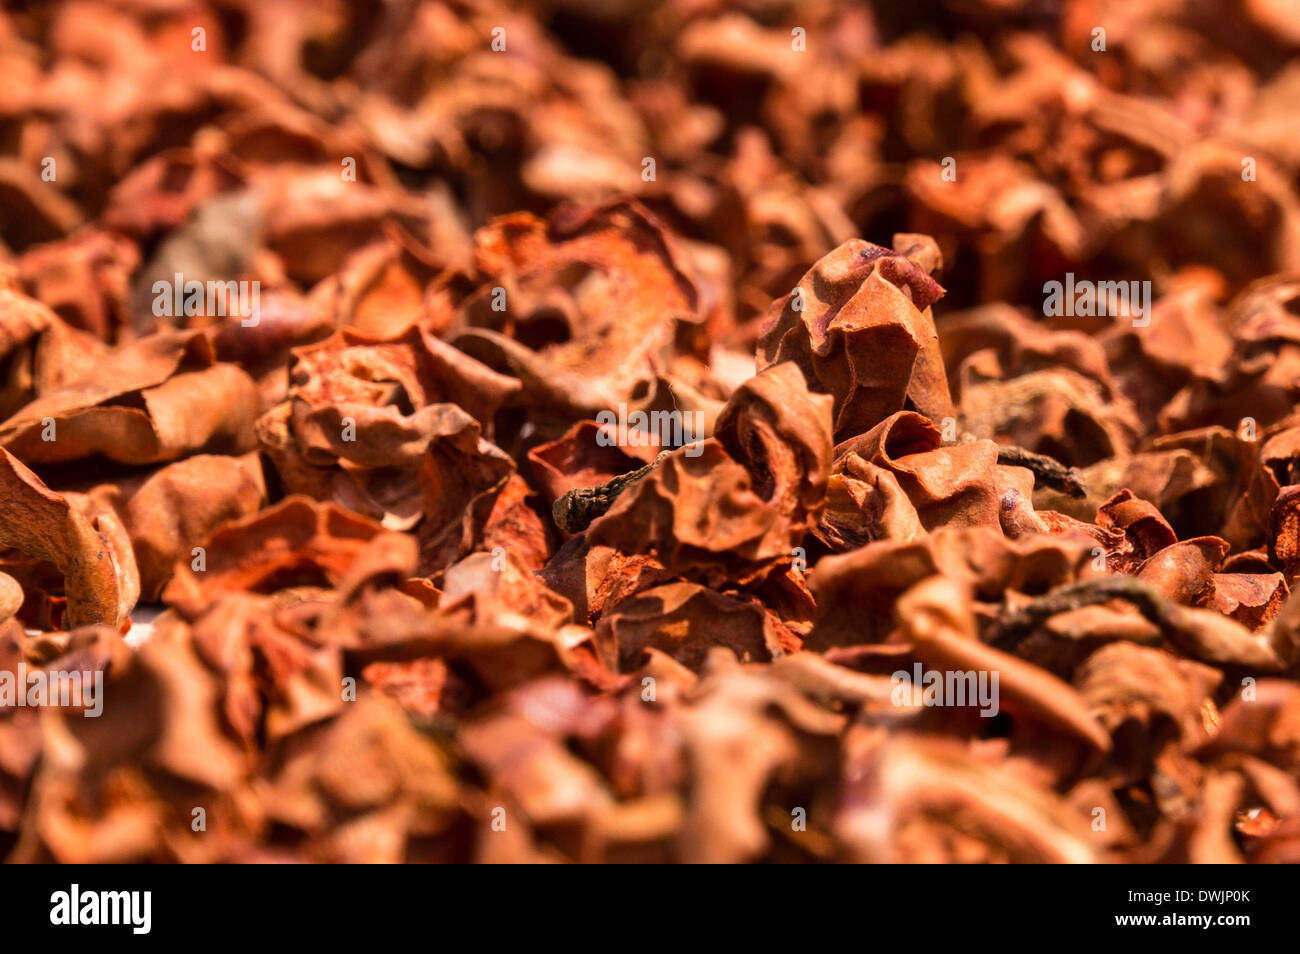 Dried mace from Nutmegs Stock Photo